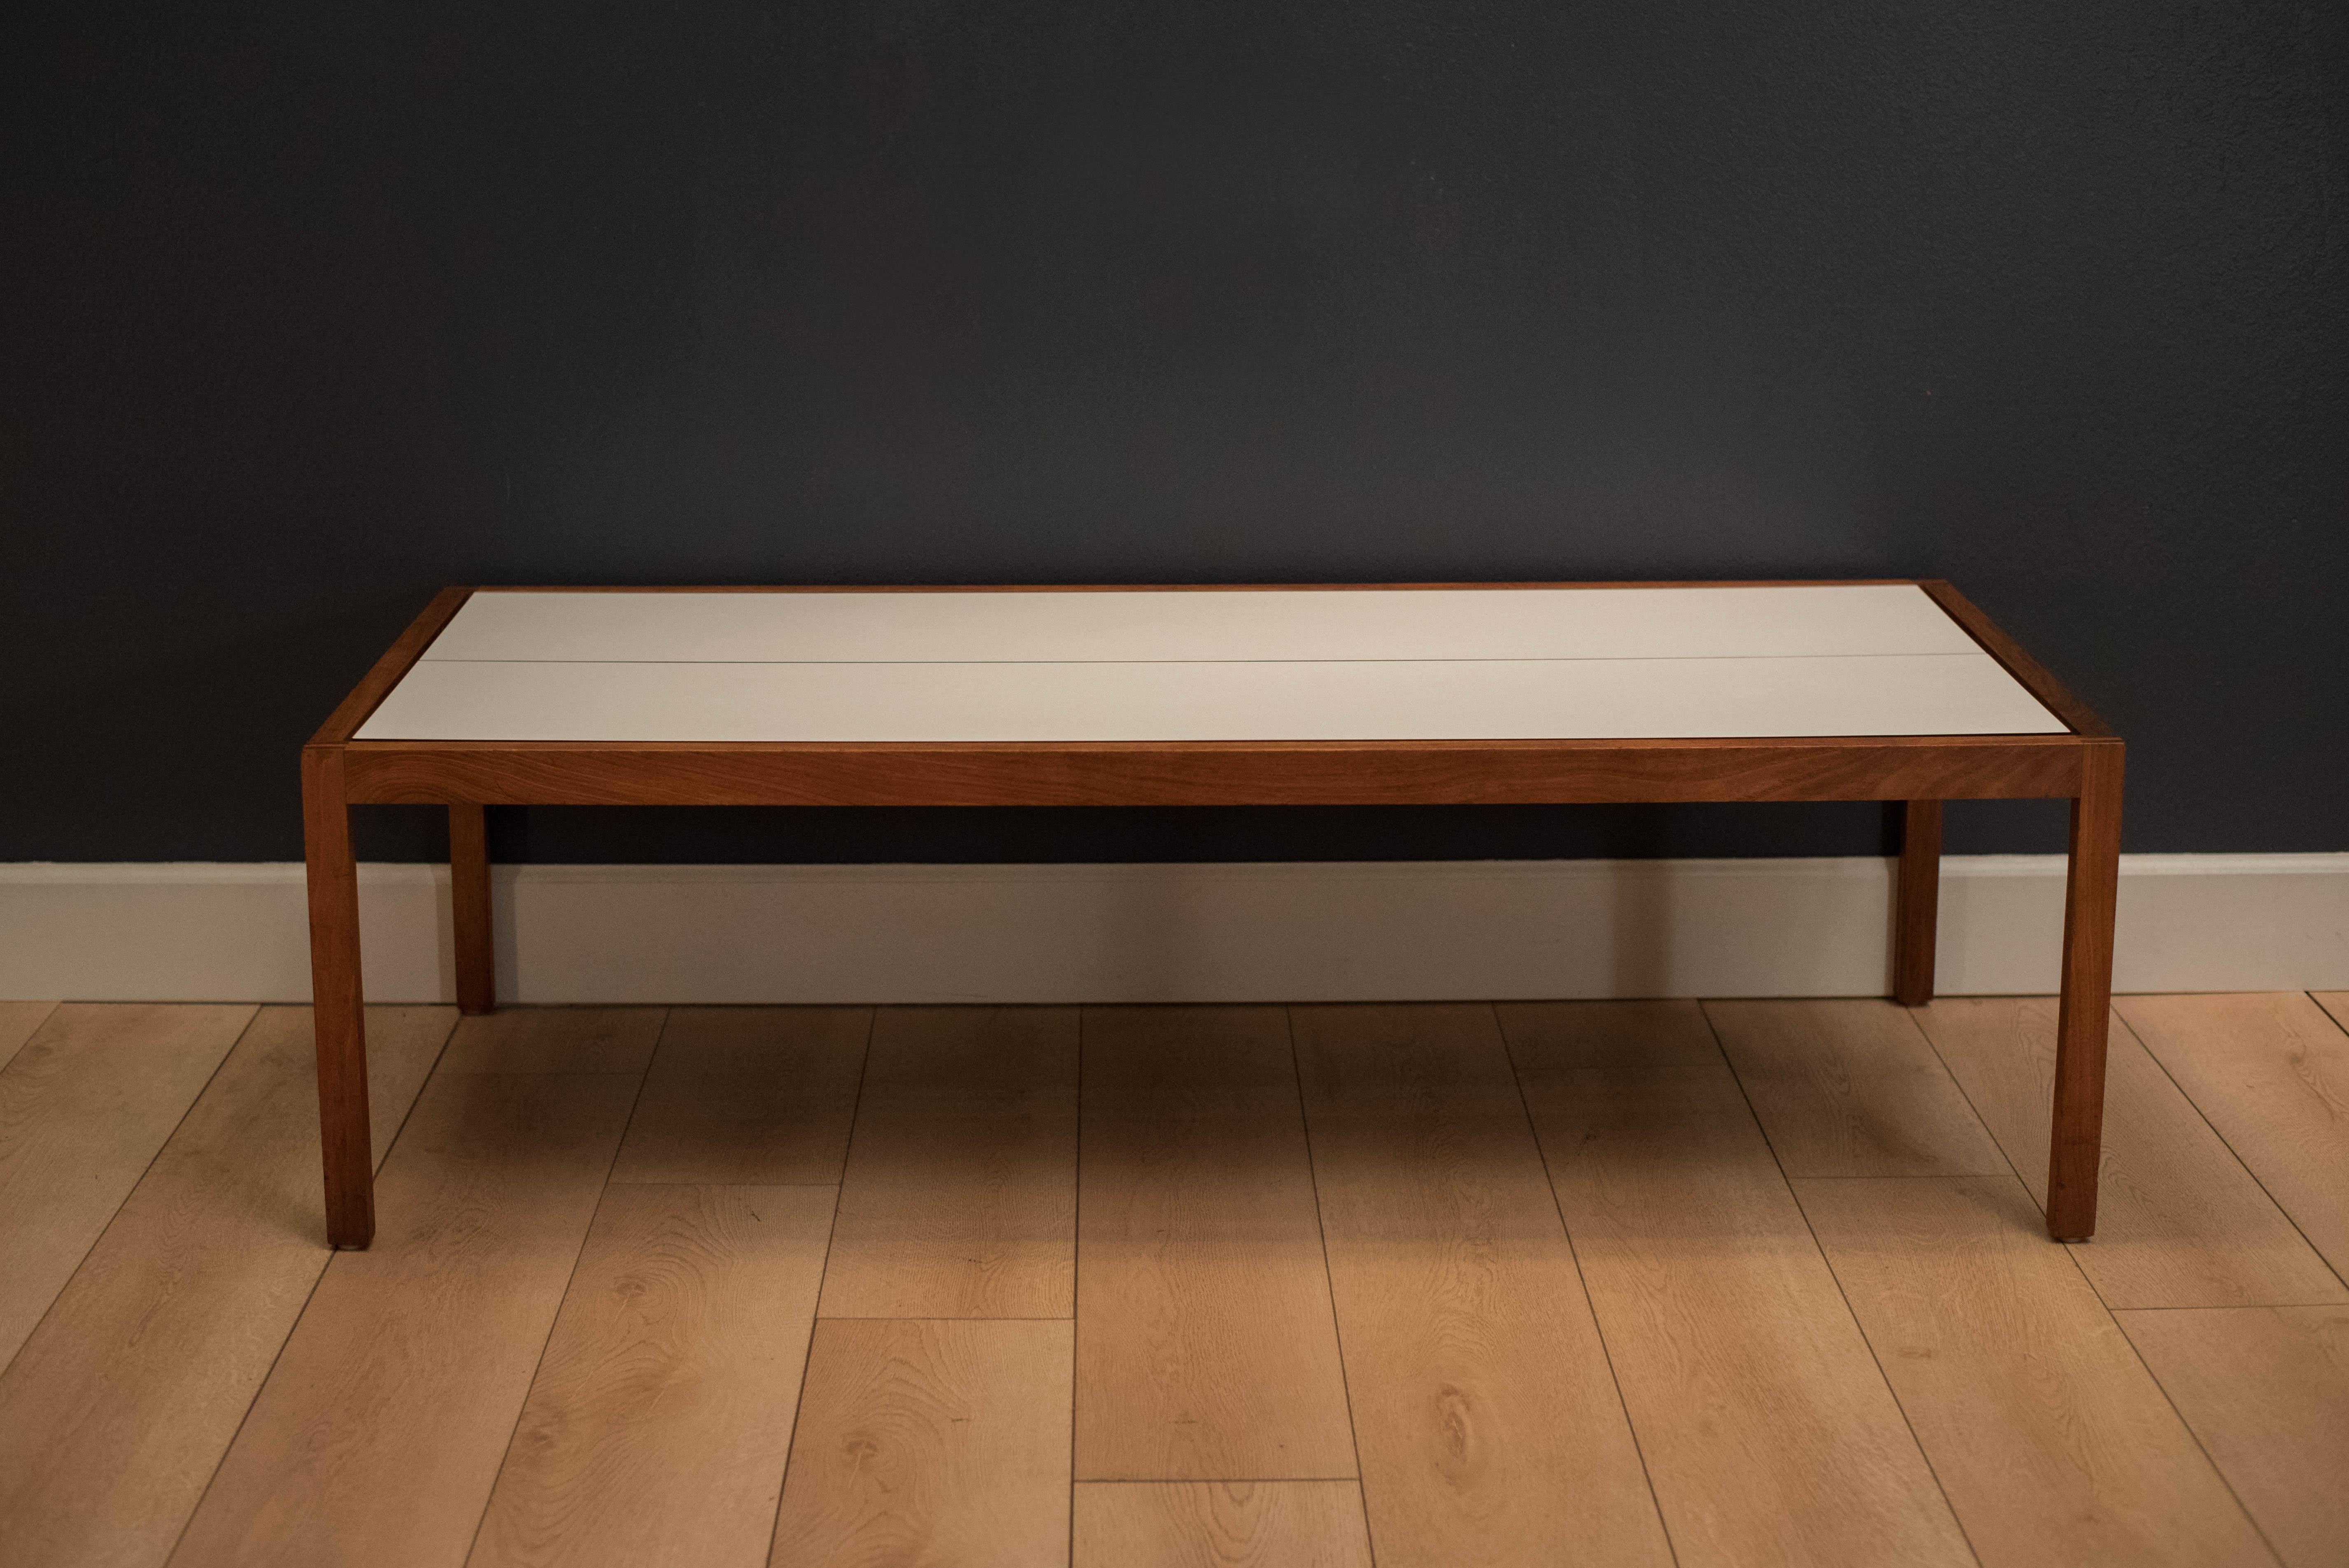 Mid century coffee table table designed by Lewis Butler for Knoll. This piece features a floating white laminate top with a rectangular walnut frame.